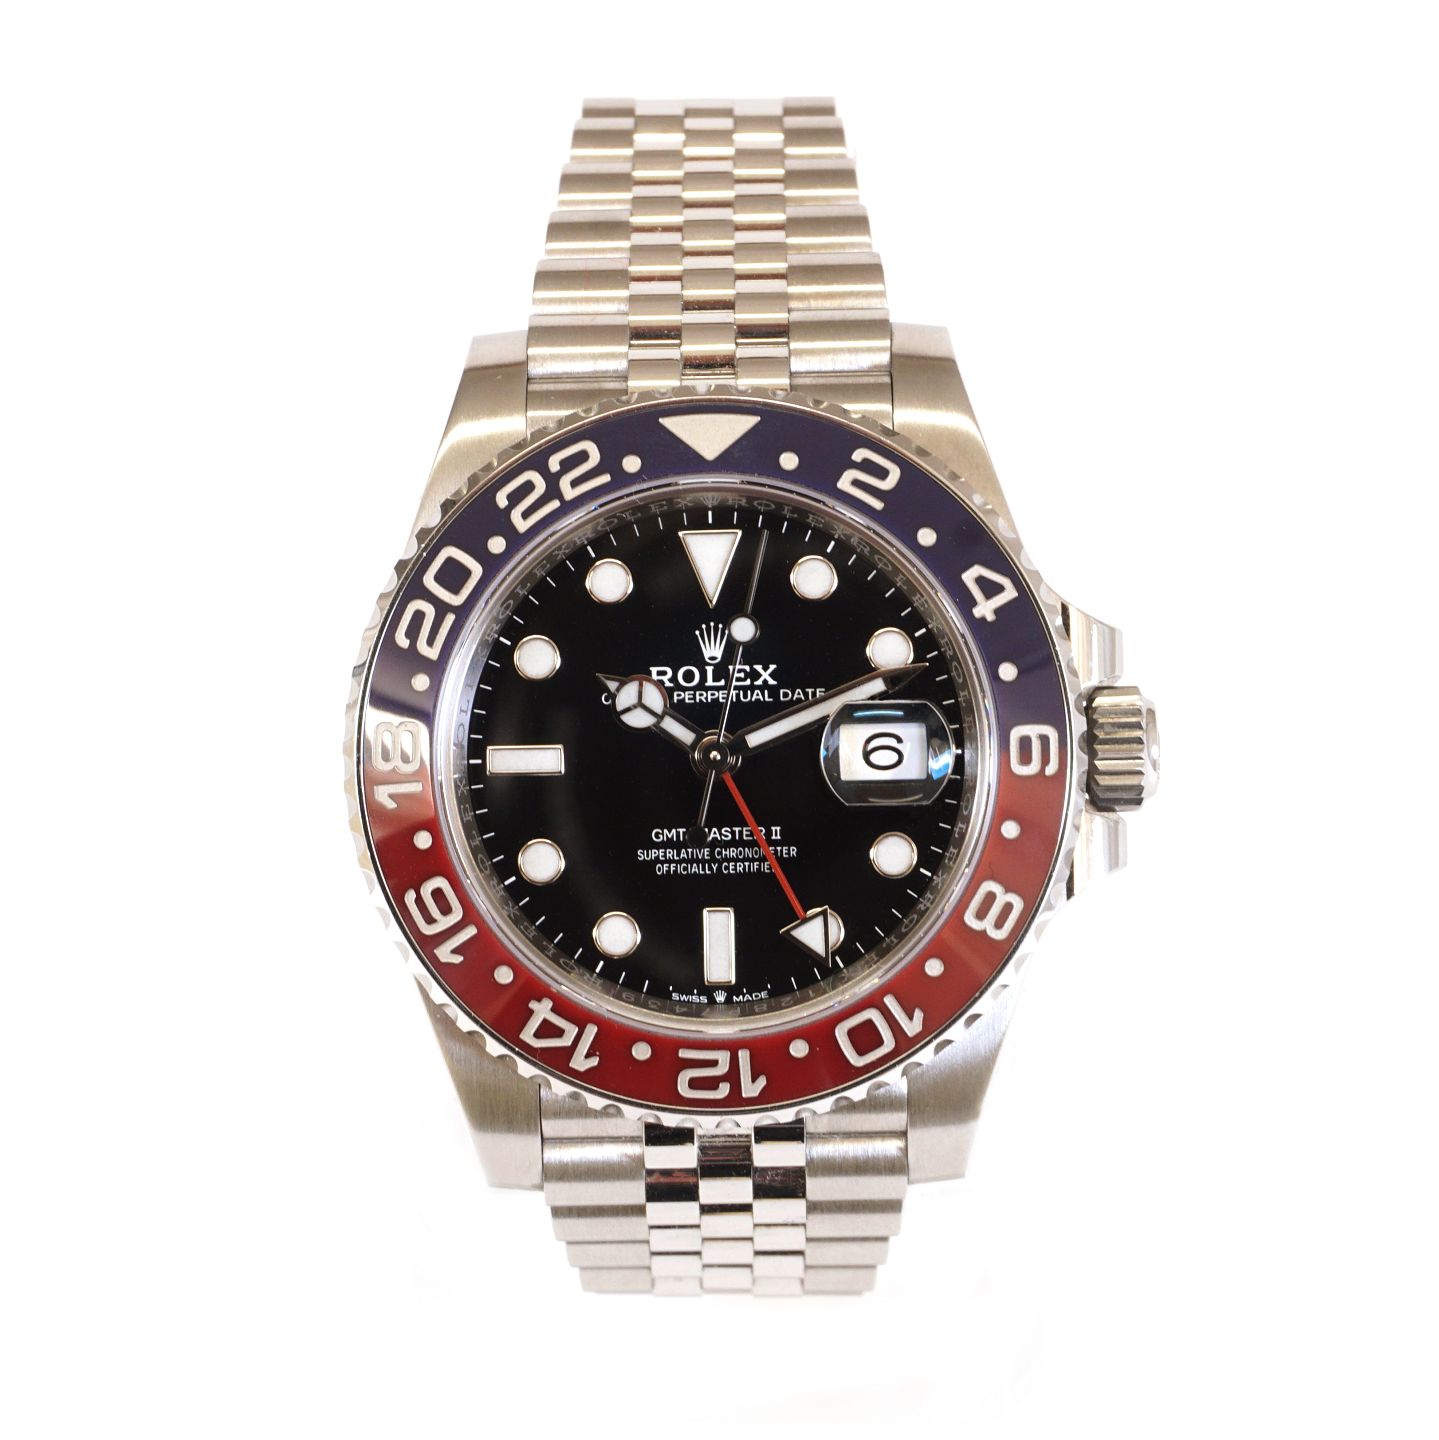 KAD ringen - Rolex GMT Master II 126710BLRO with box and papers. Bought at AD Klarlund, Copen - Rolex GMT II 126710BLRO with box and papers. Bought at AD Klarlund, Copen